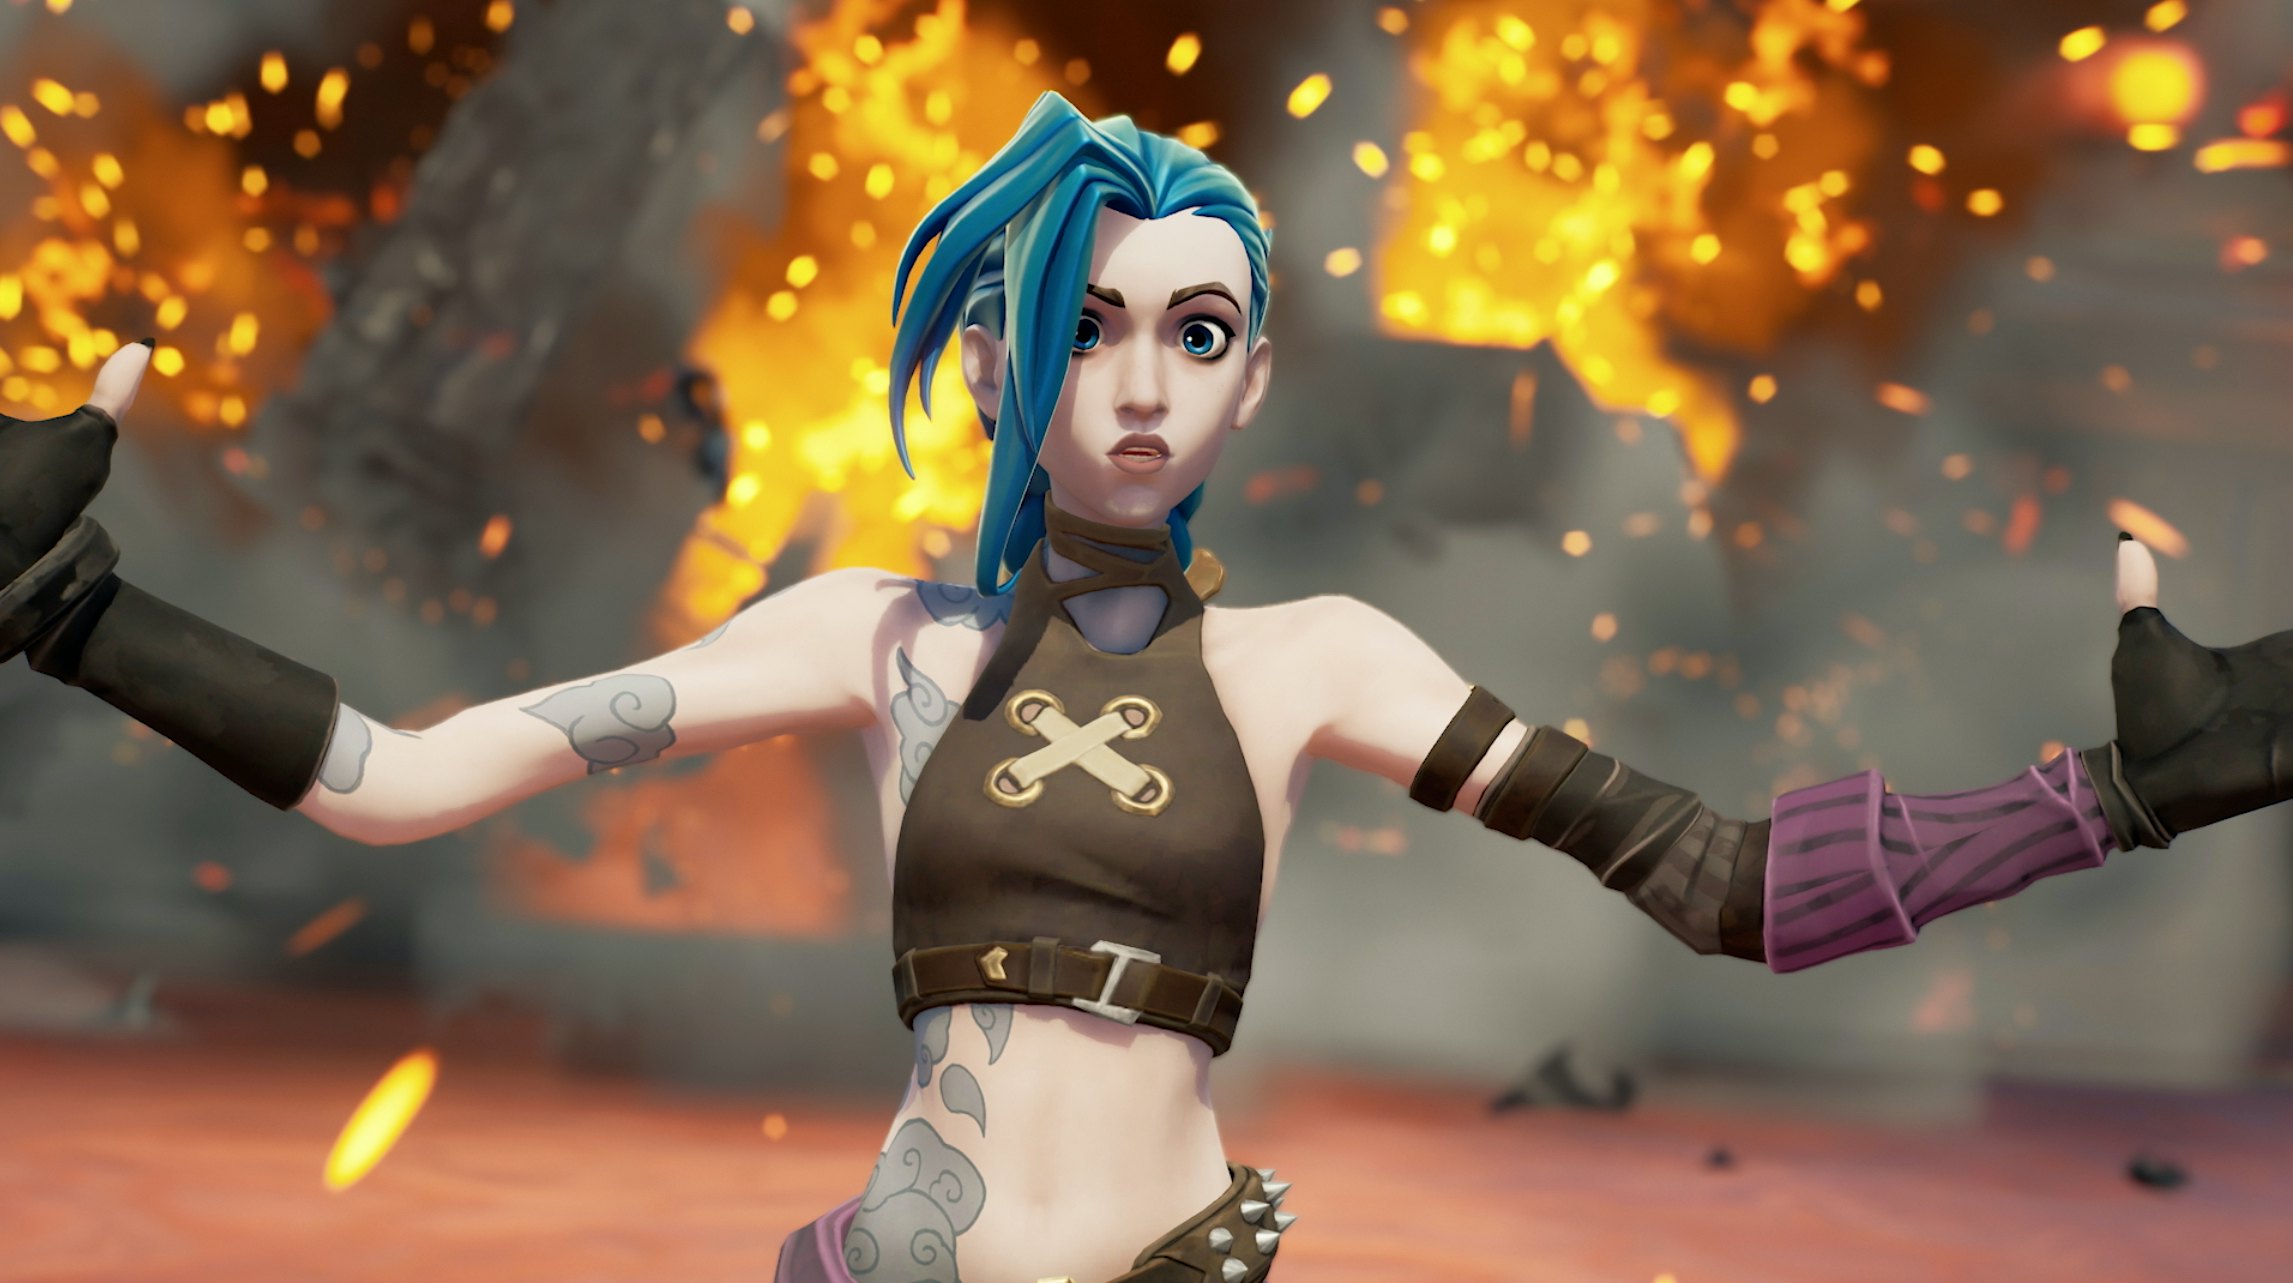 Here's Fortnite's Jinx 'League Of Legends' Crossover Skin